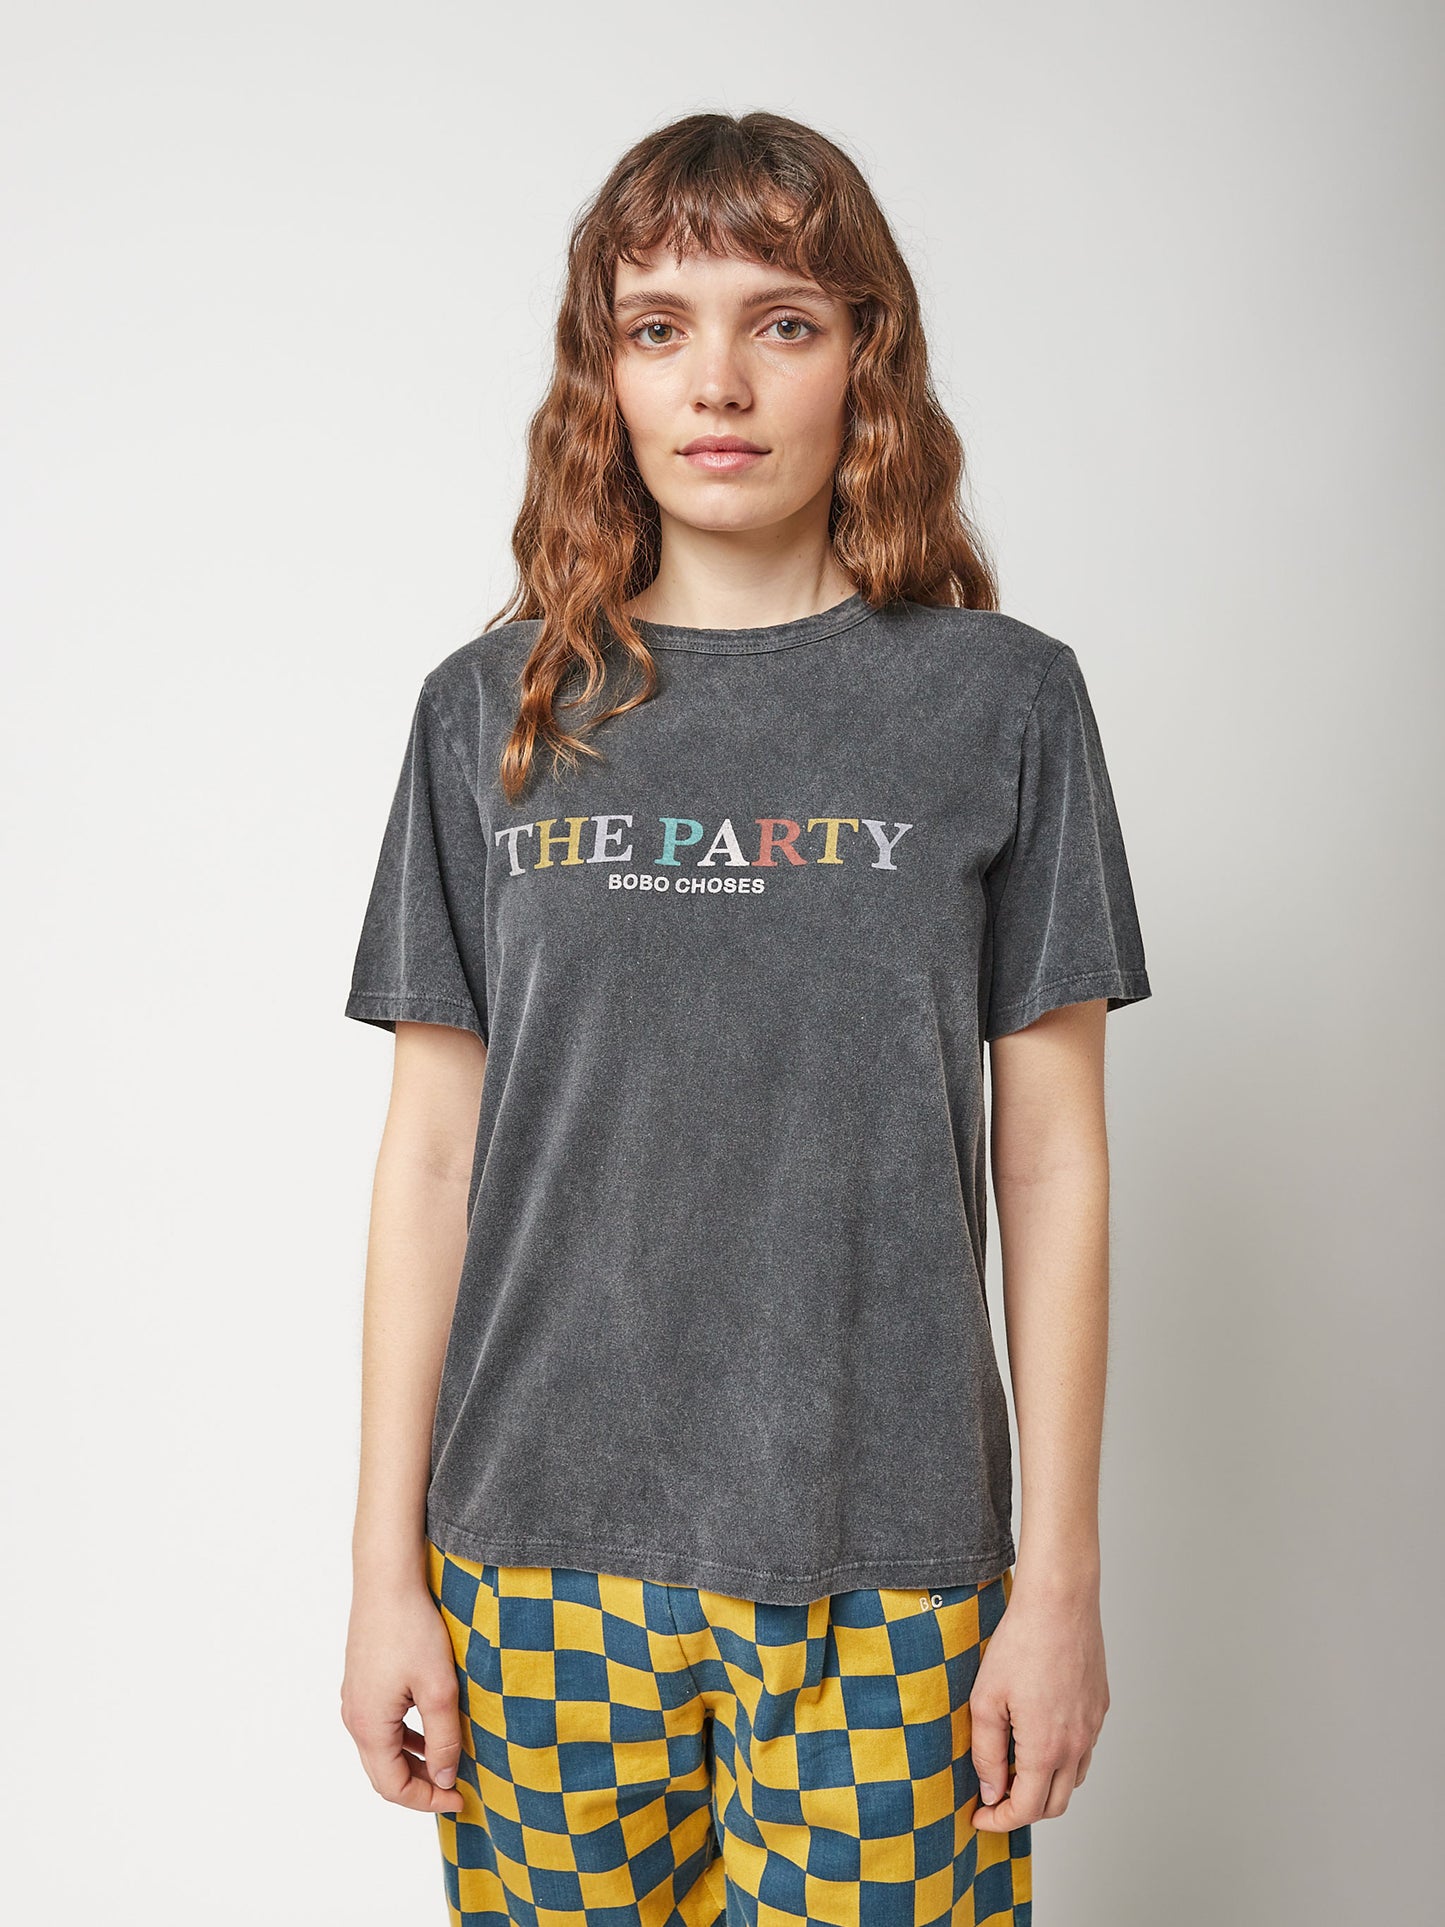 The party T-shirt